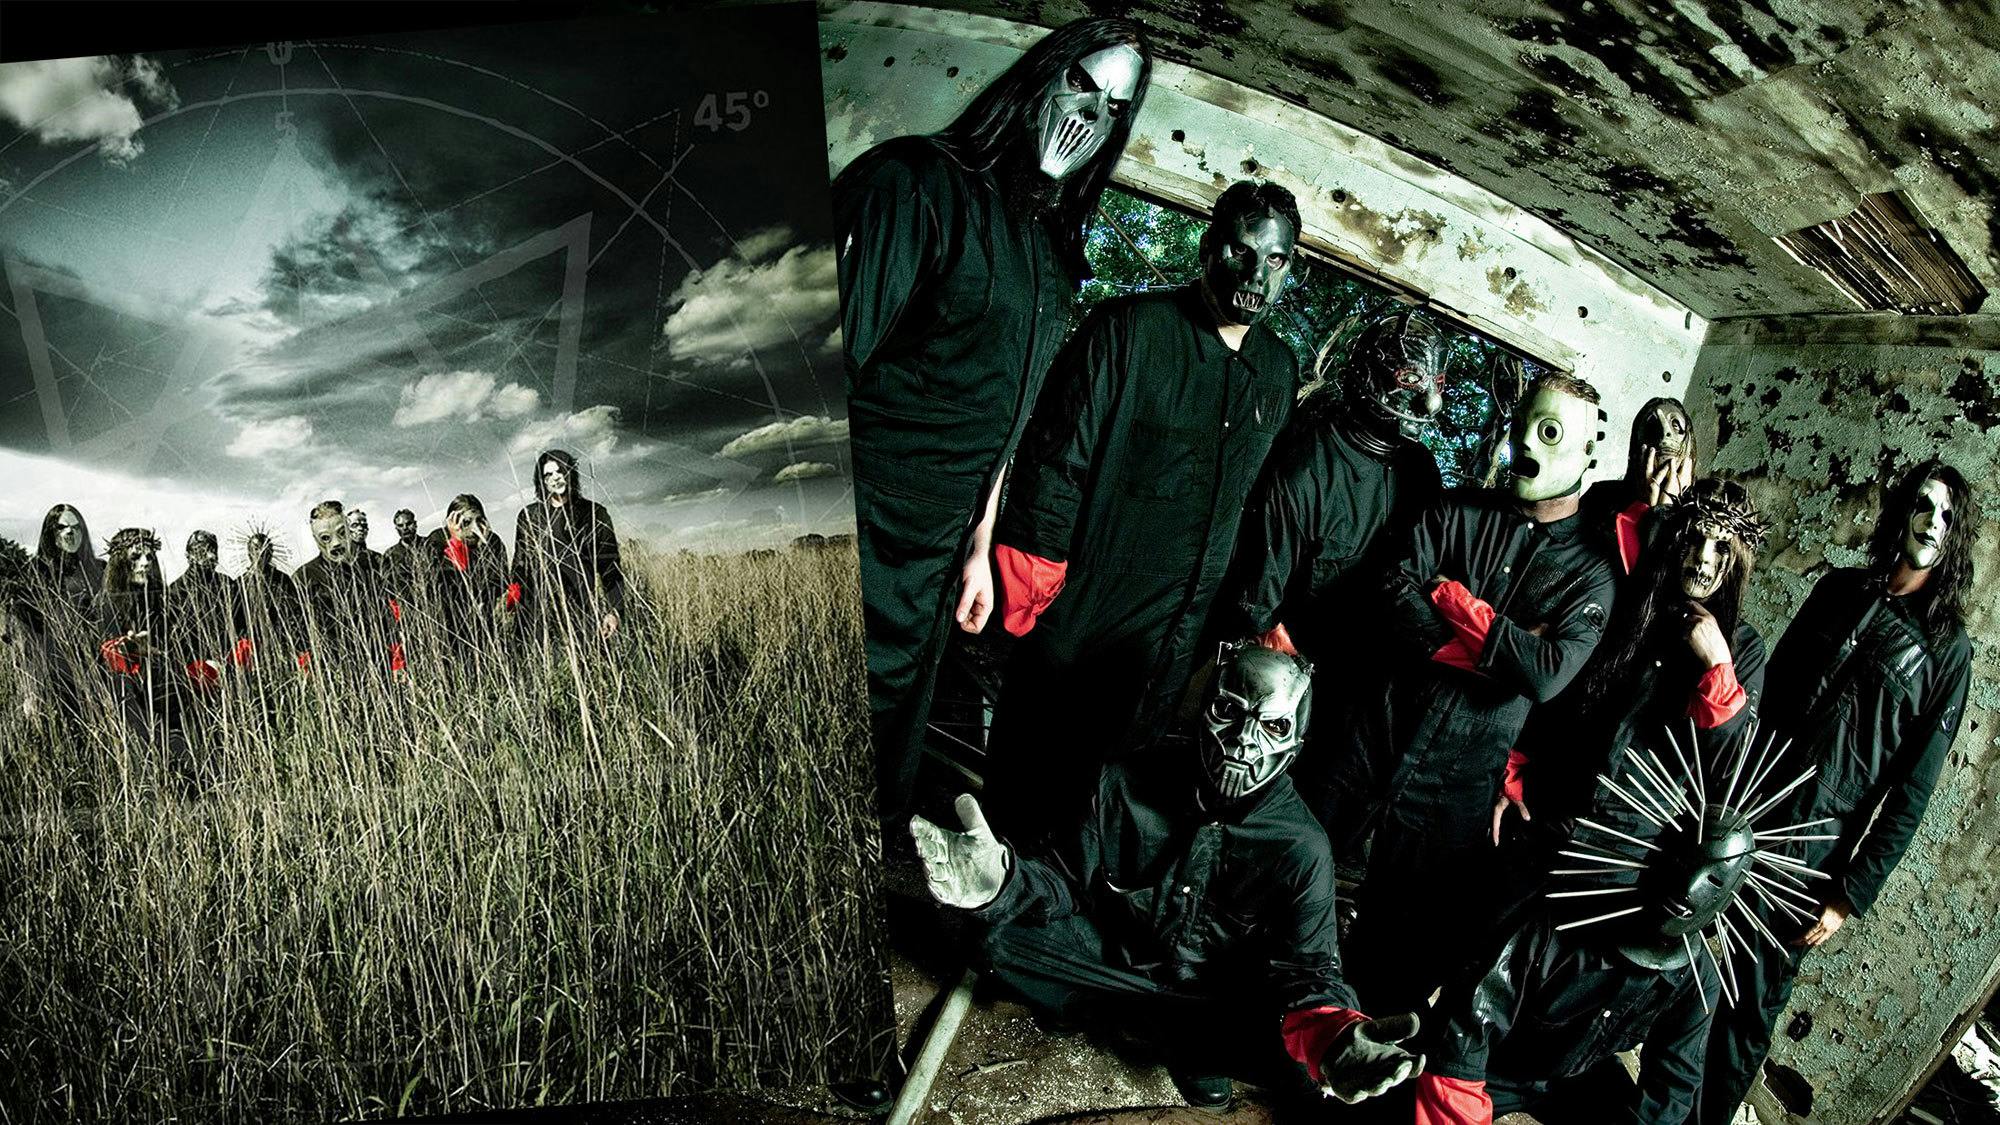 “The hate is definitely back”: The turbulent story of Slipknot’s All Hope Is Gone